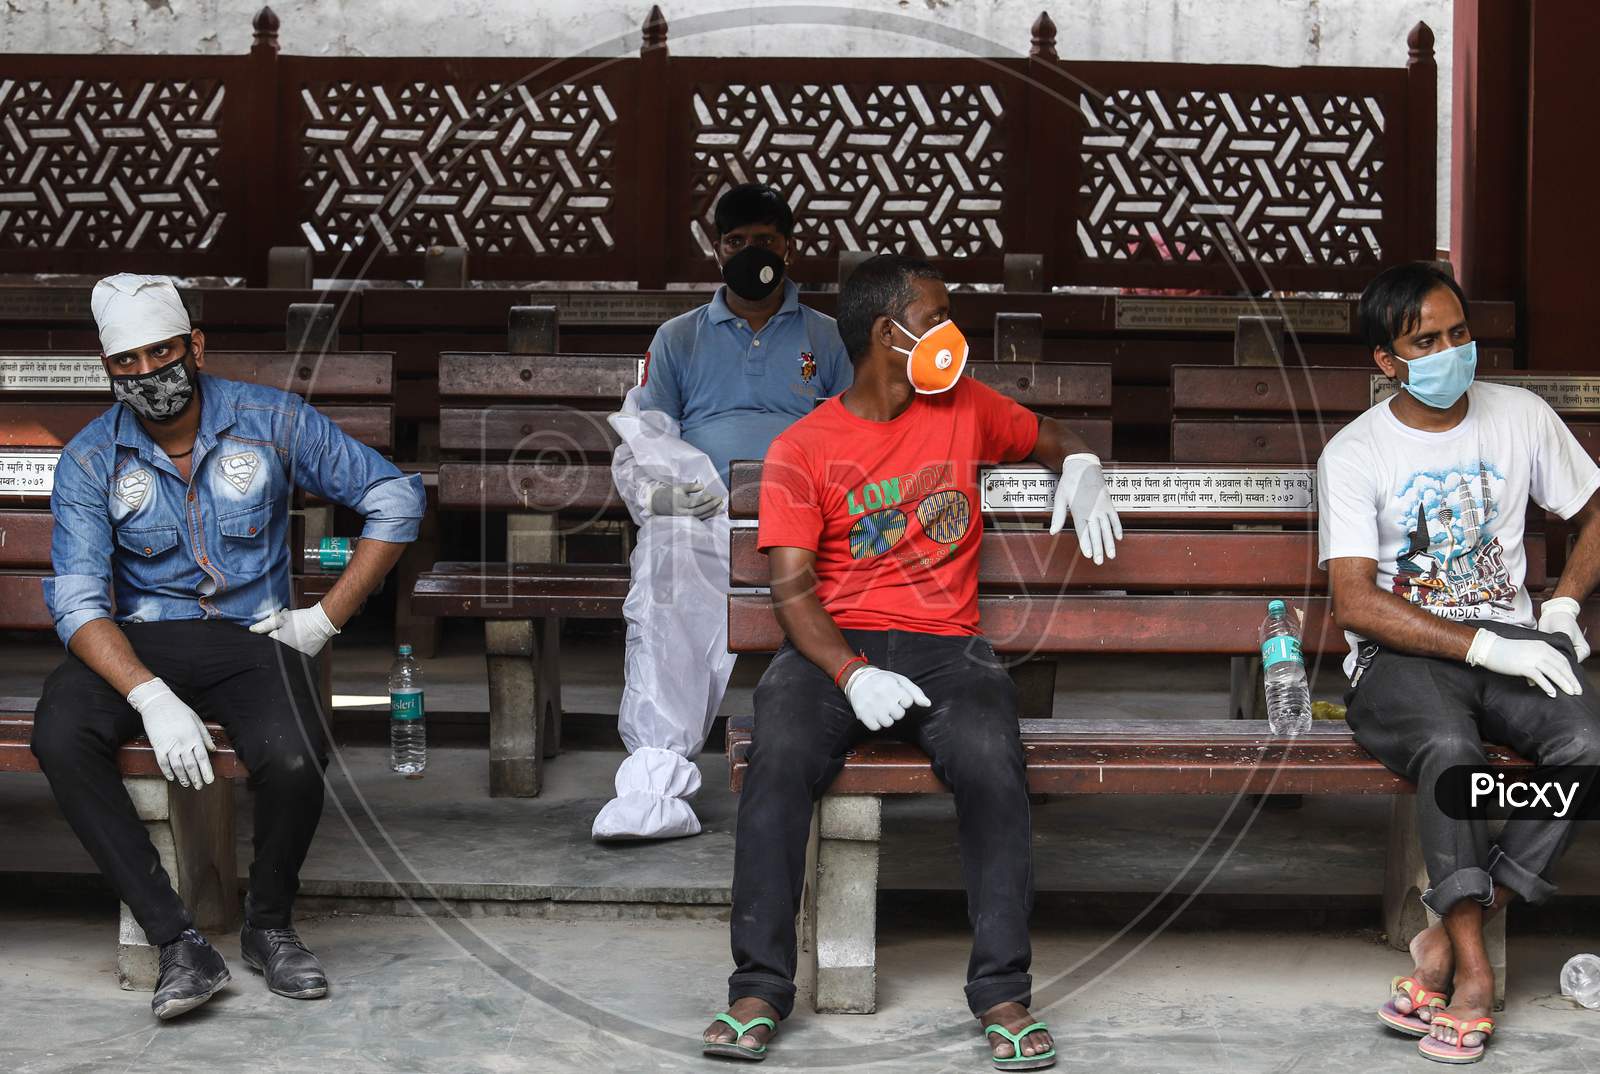 Relatives Wear Ppe Kits While Performing Last Rites Of People Who Died From Covid 19 In New Delhi, India On June 15, 2020.